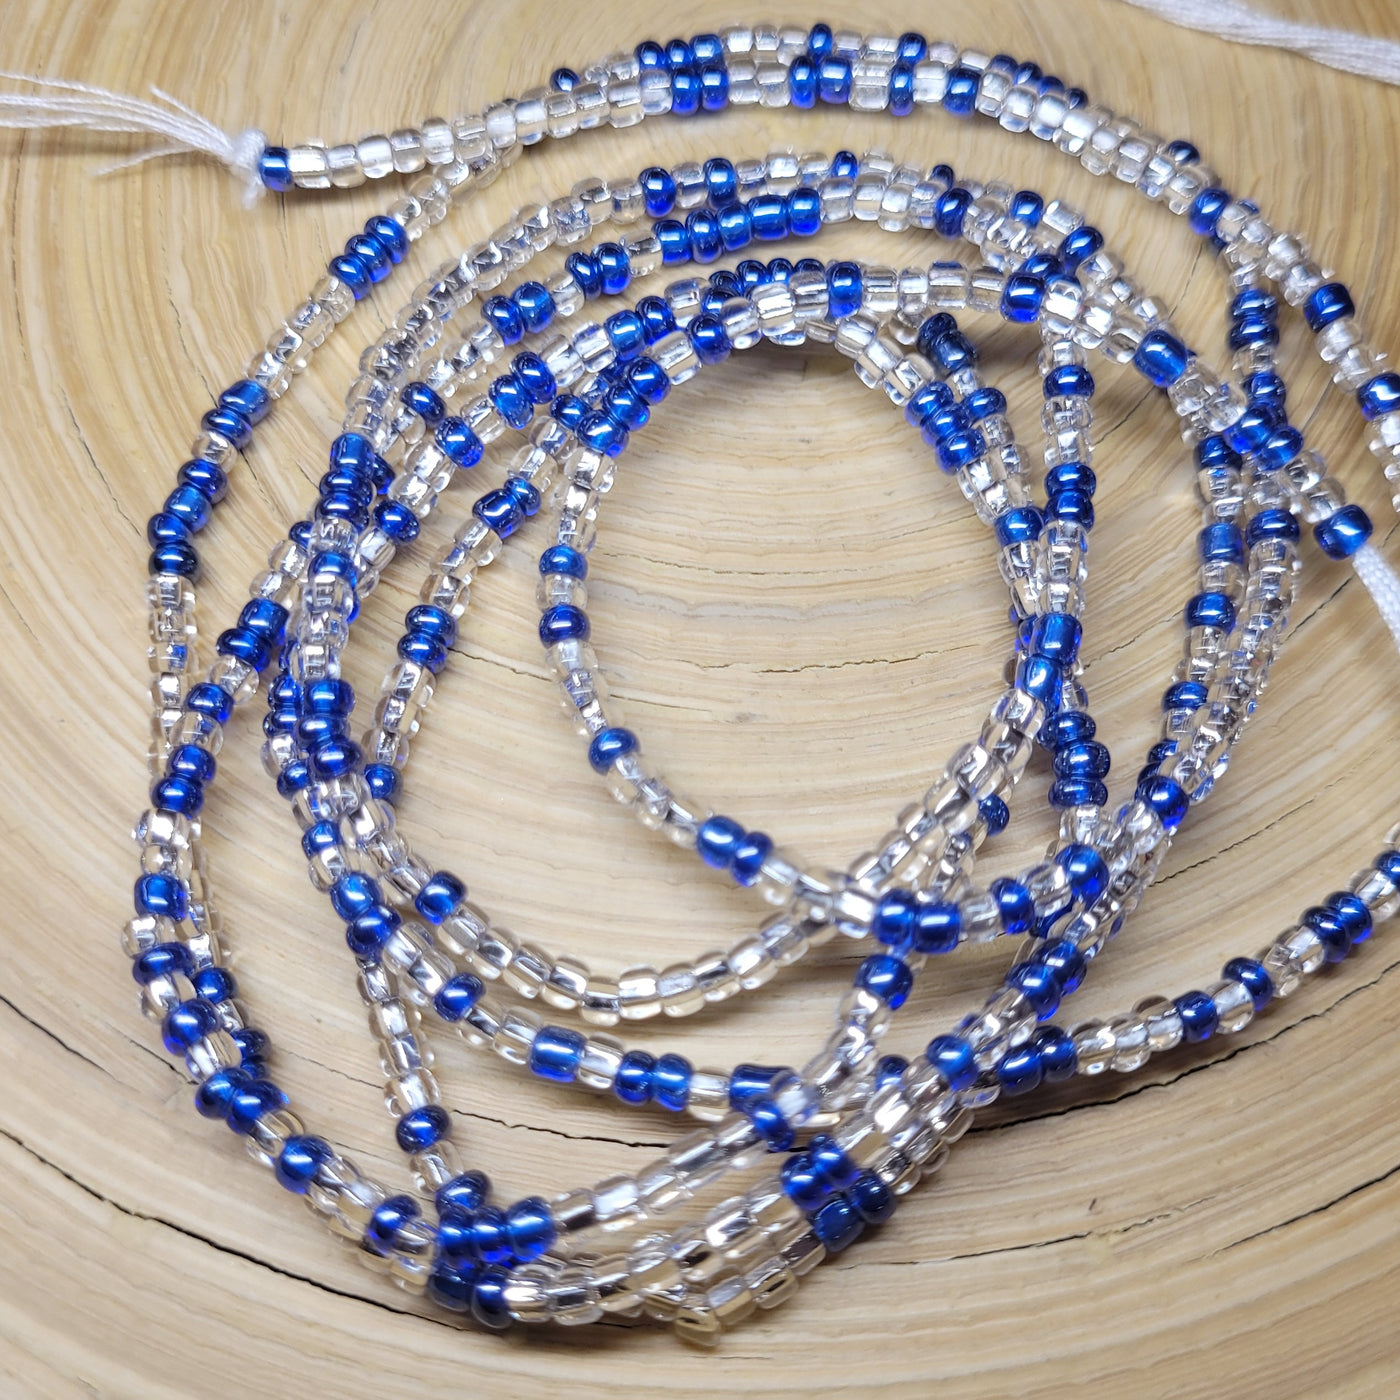 Two Toned "Blue and Clear" Waist Beads